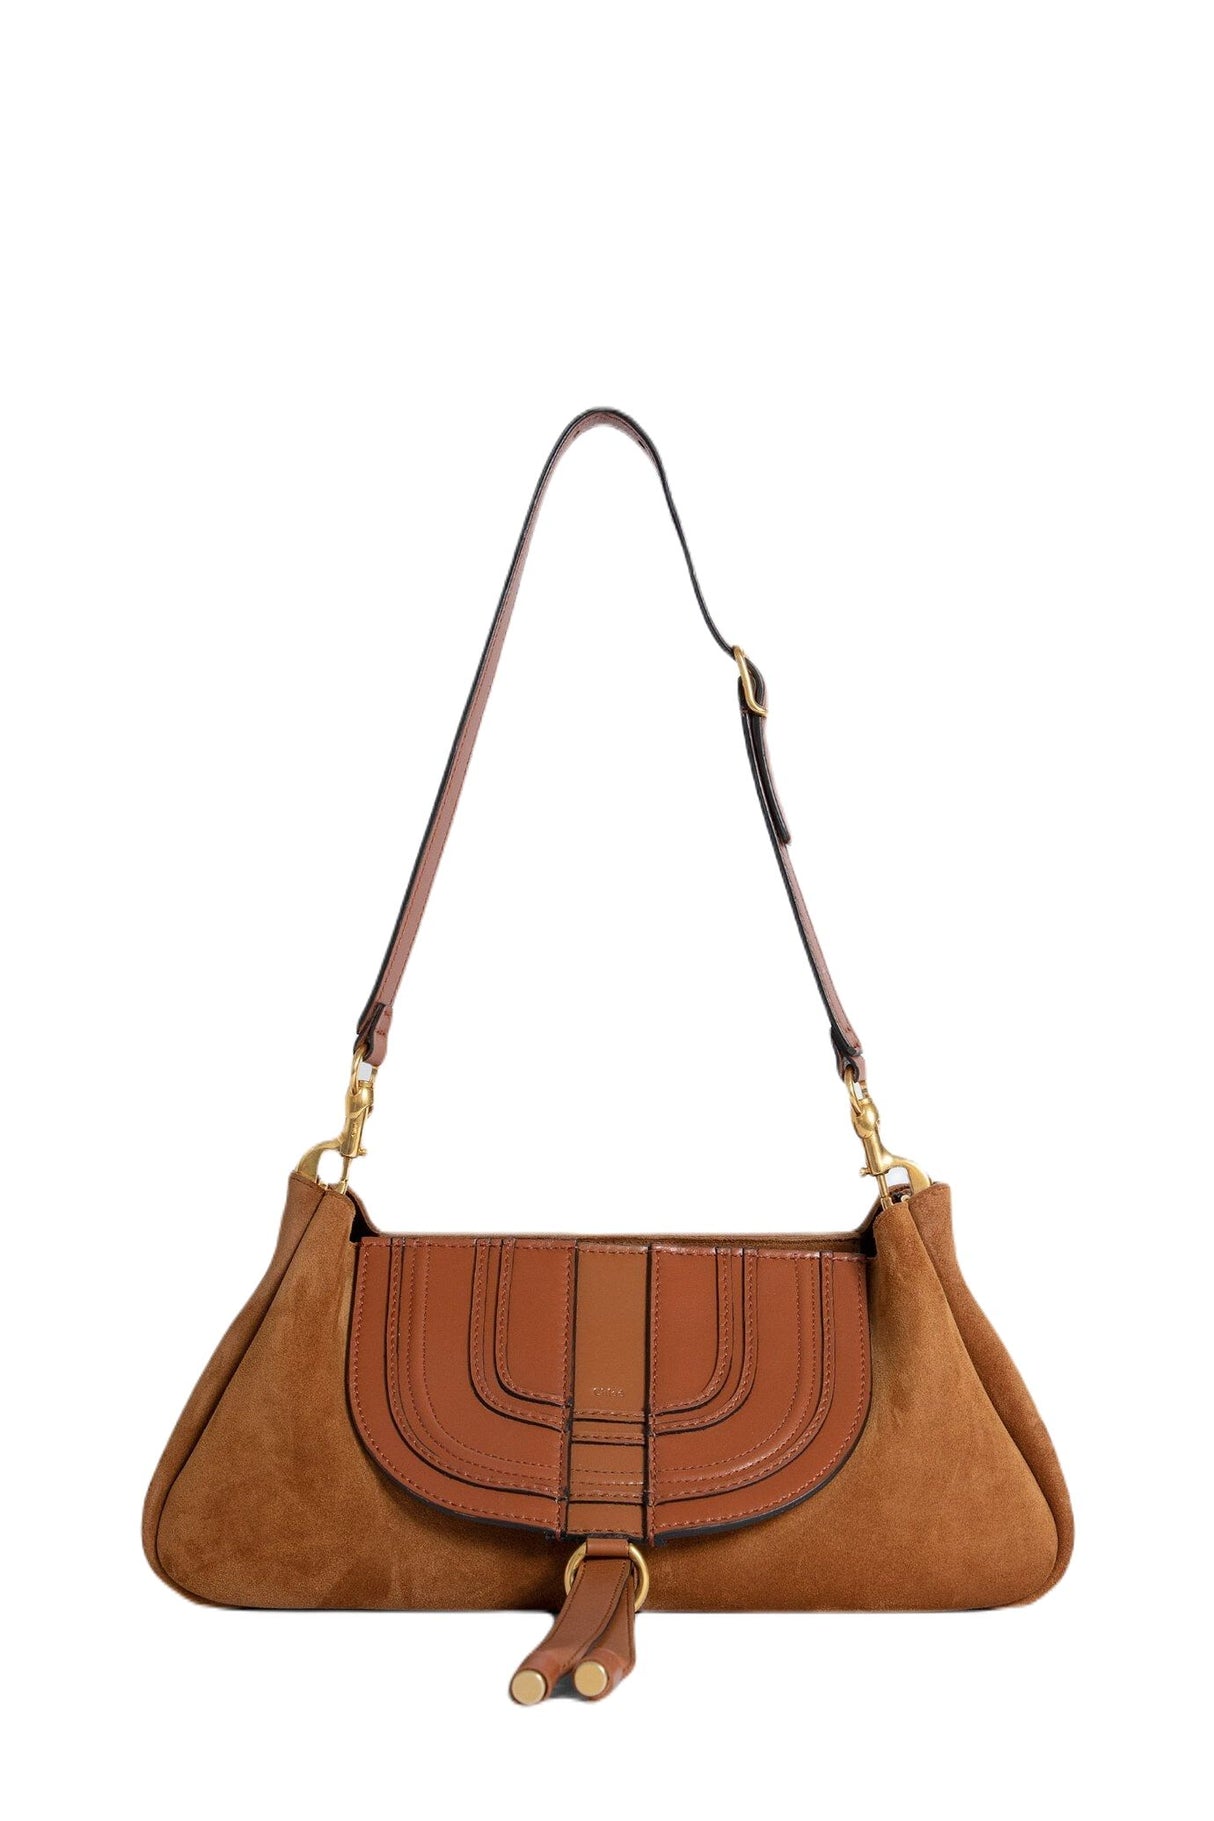 CHLOÉ Caramel Brown Shopping Bag with Shoulder Strap - SS23 Collection